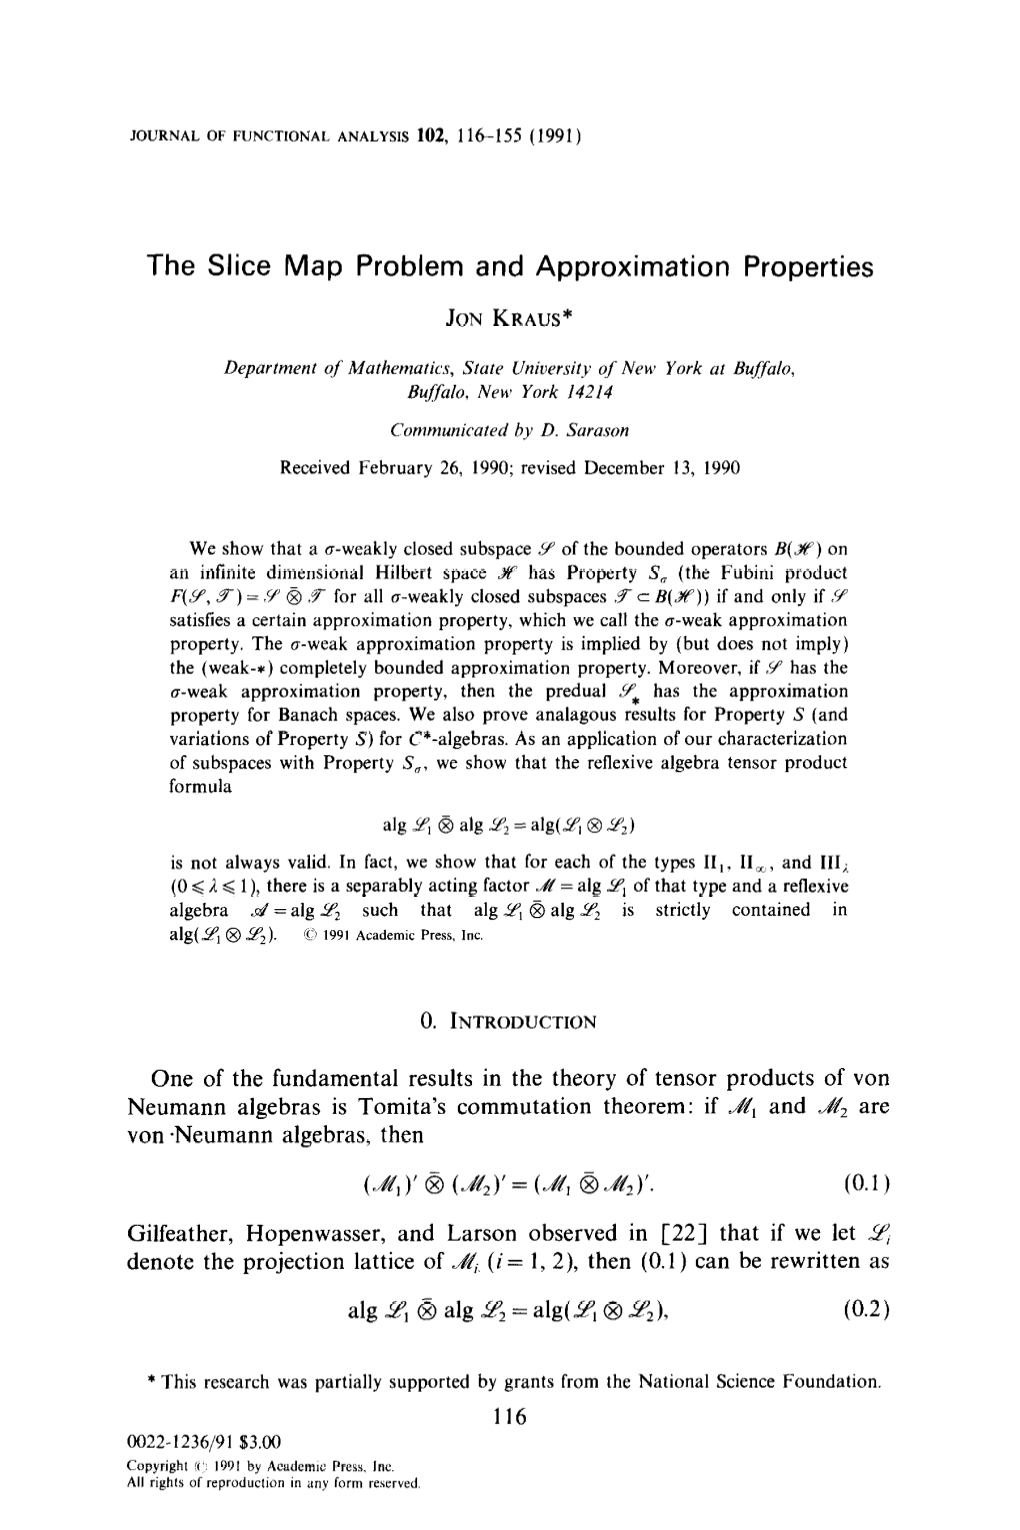 The Slice Map Problem and Approximation Properties